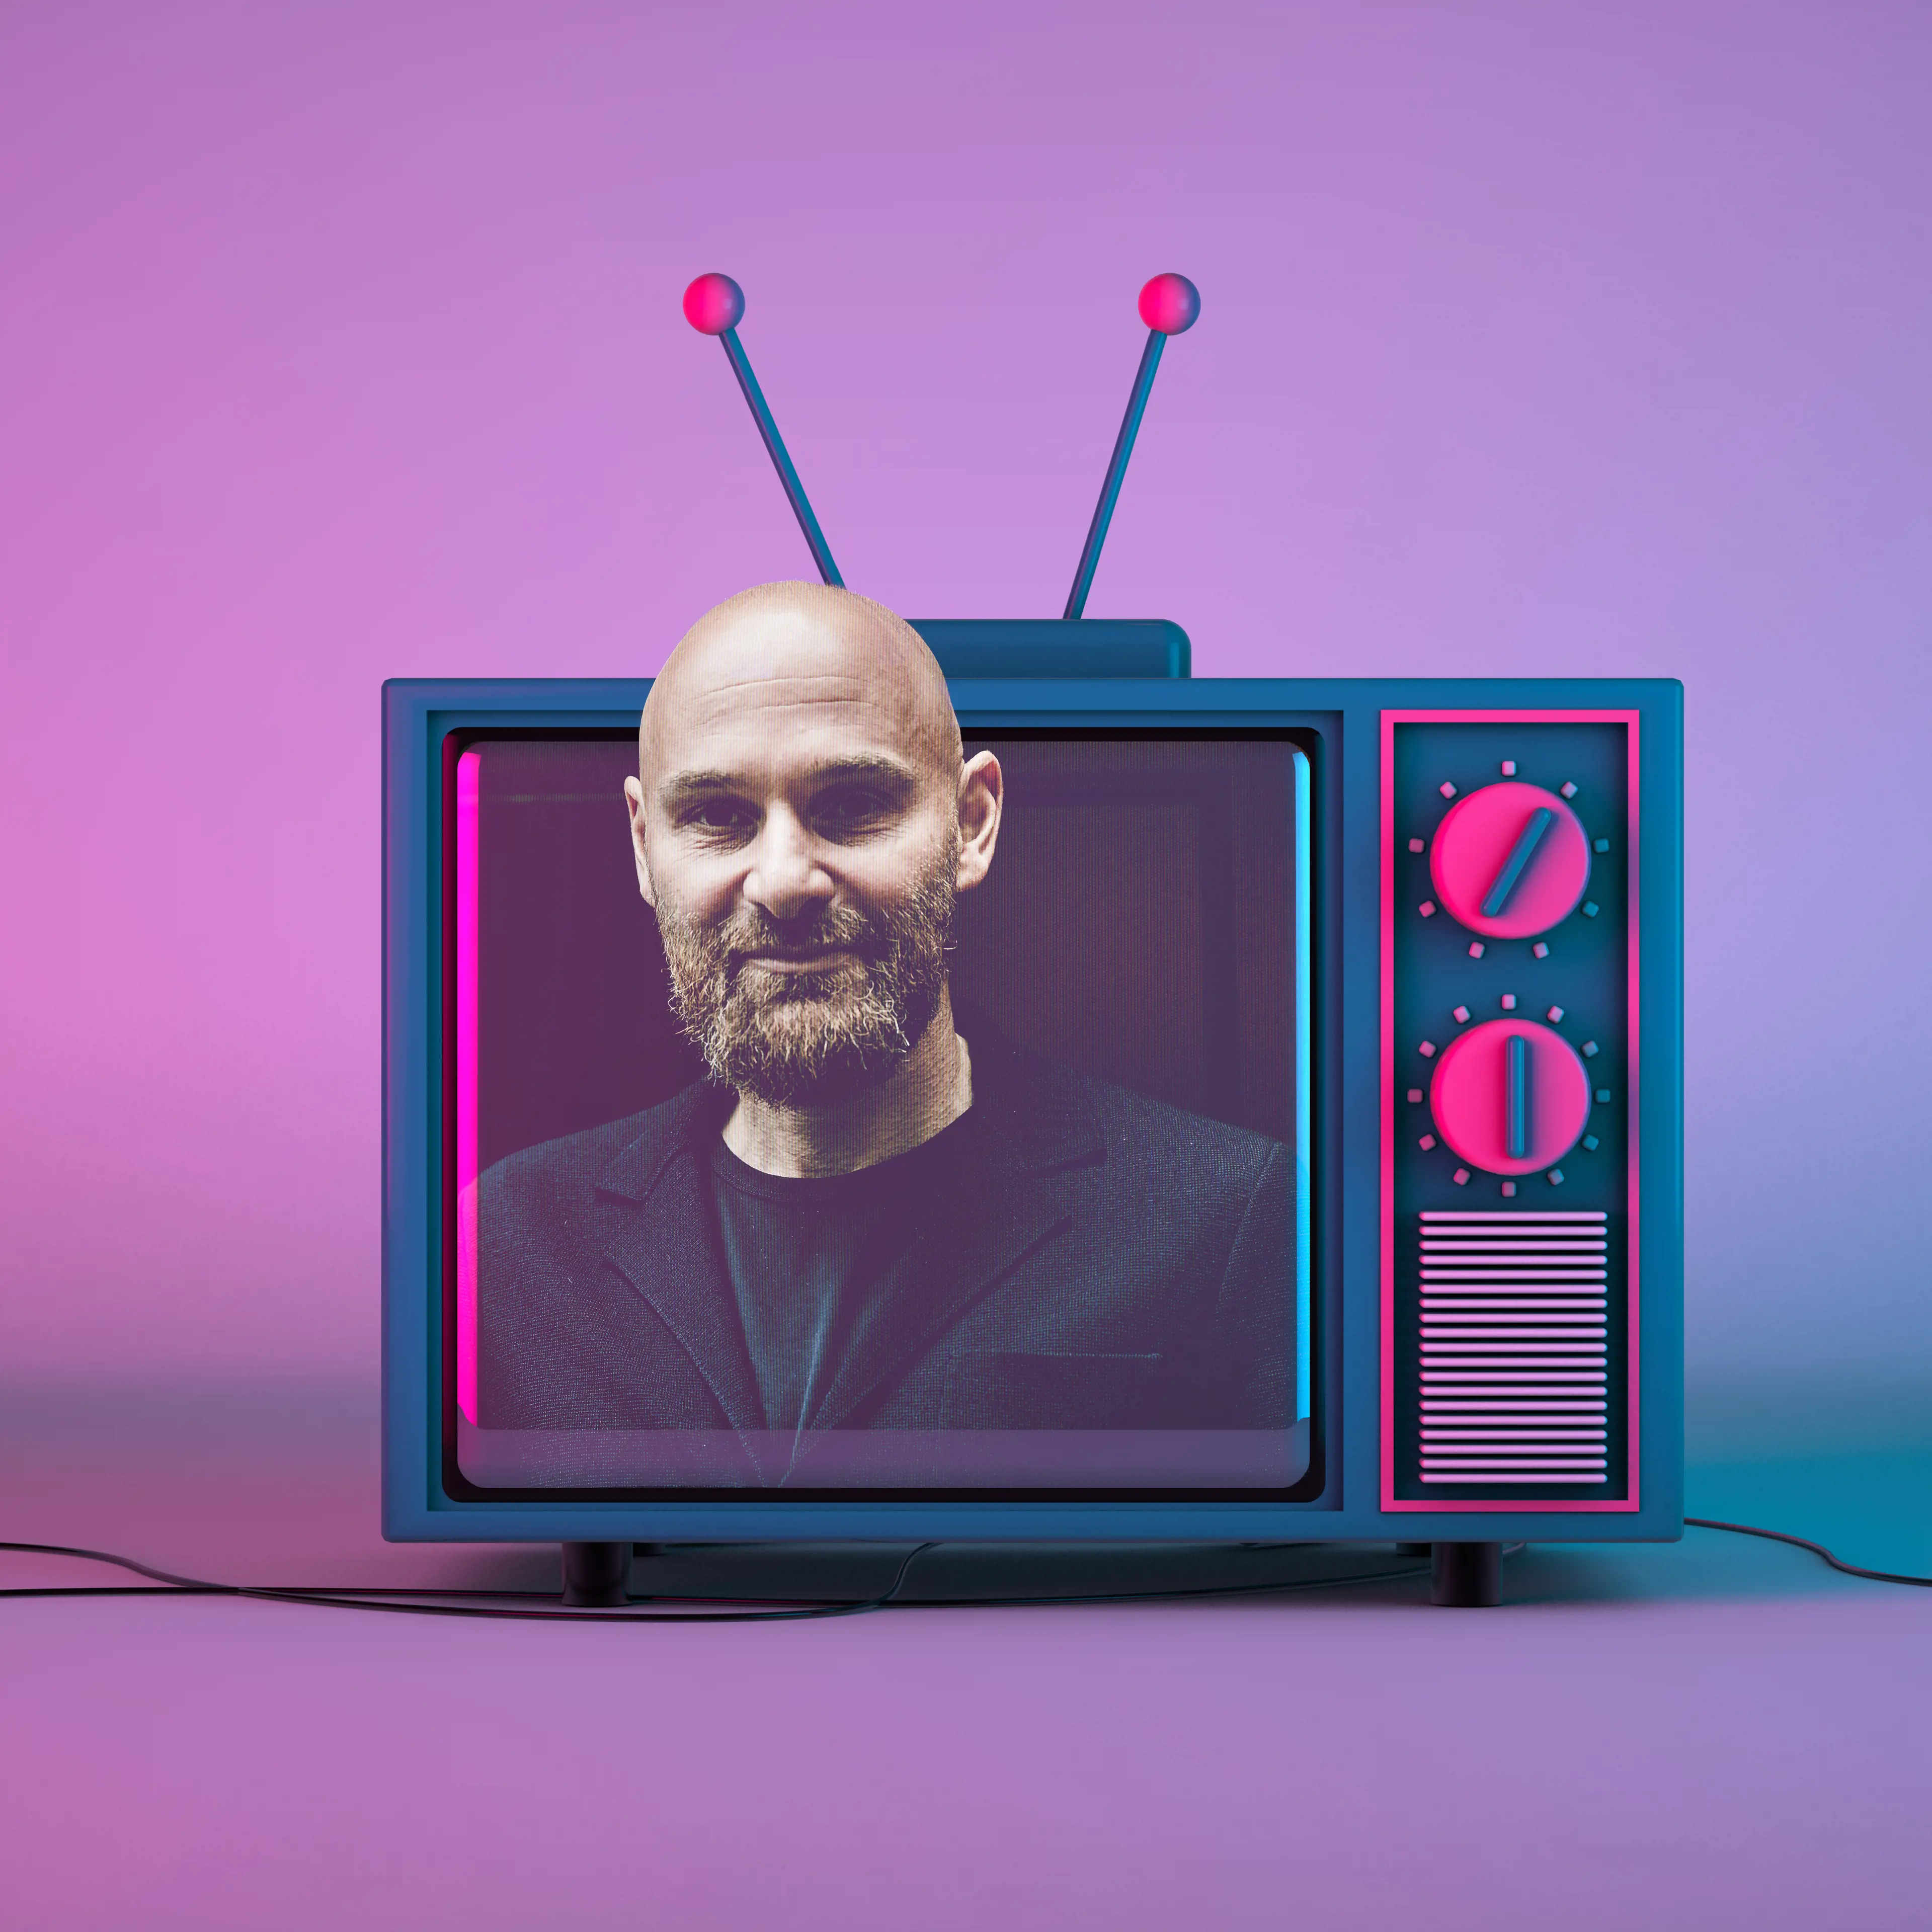 television with image of a man